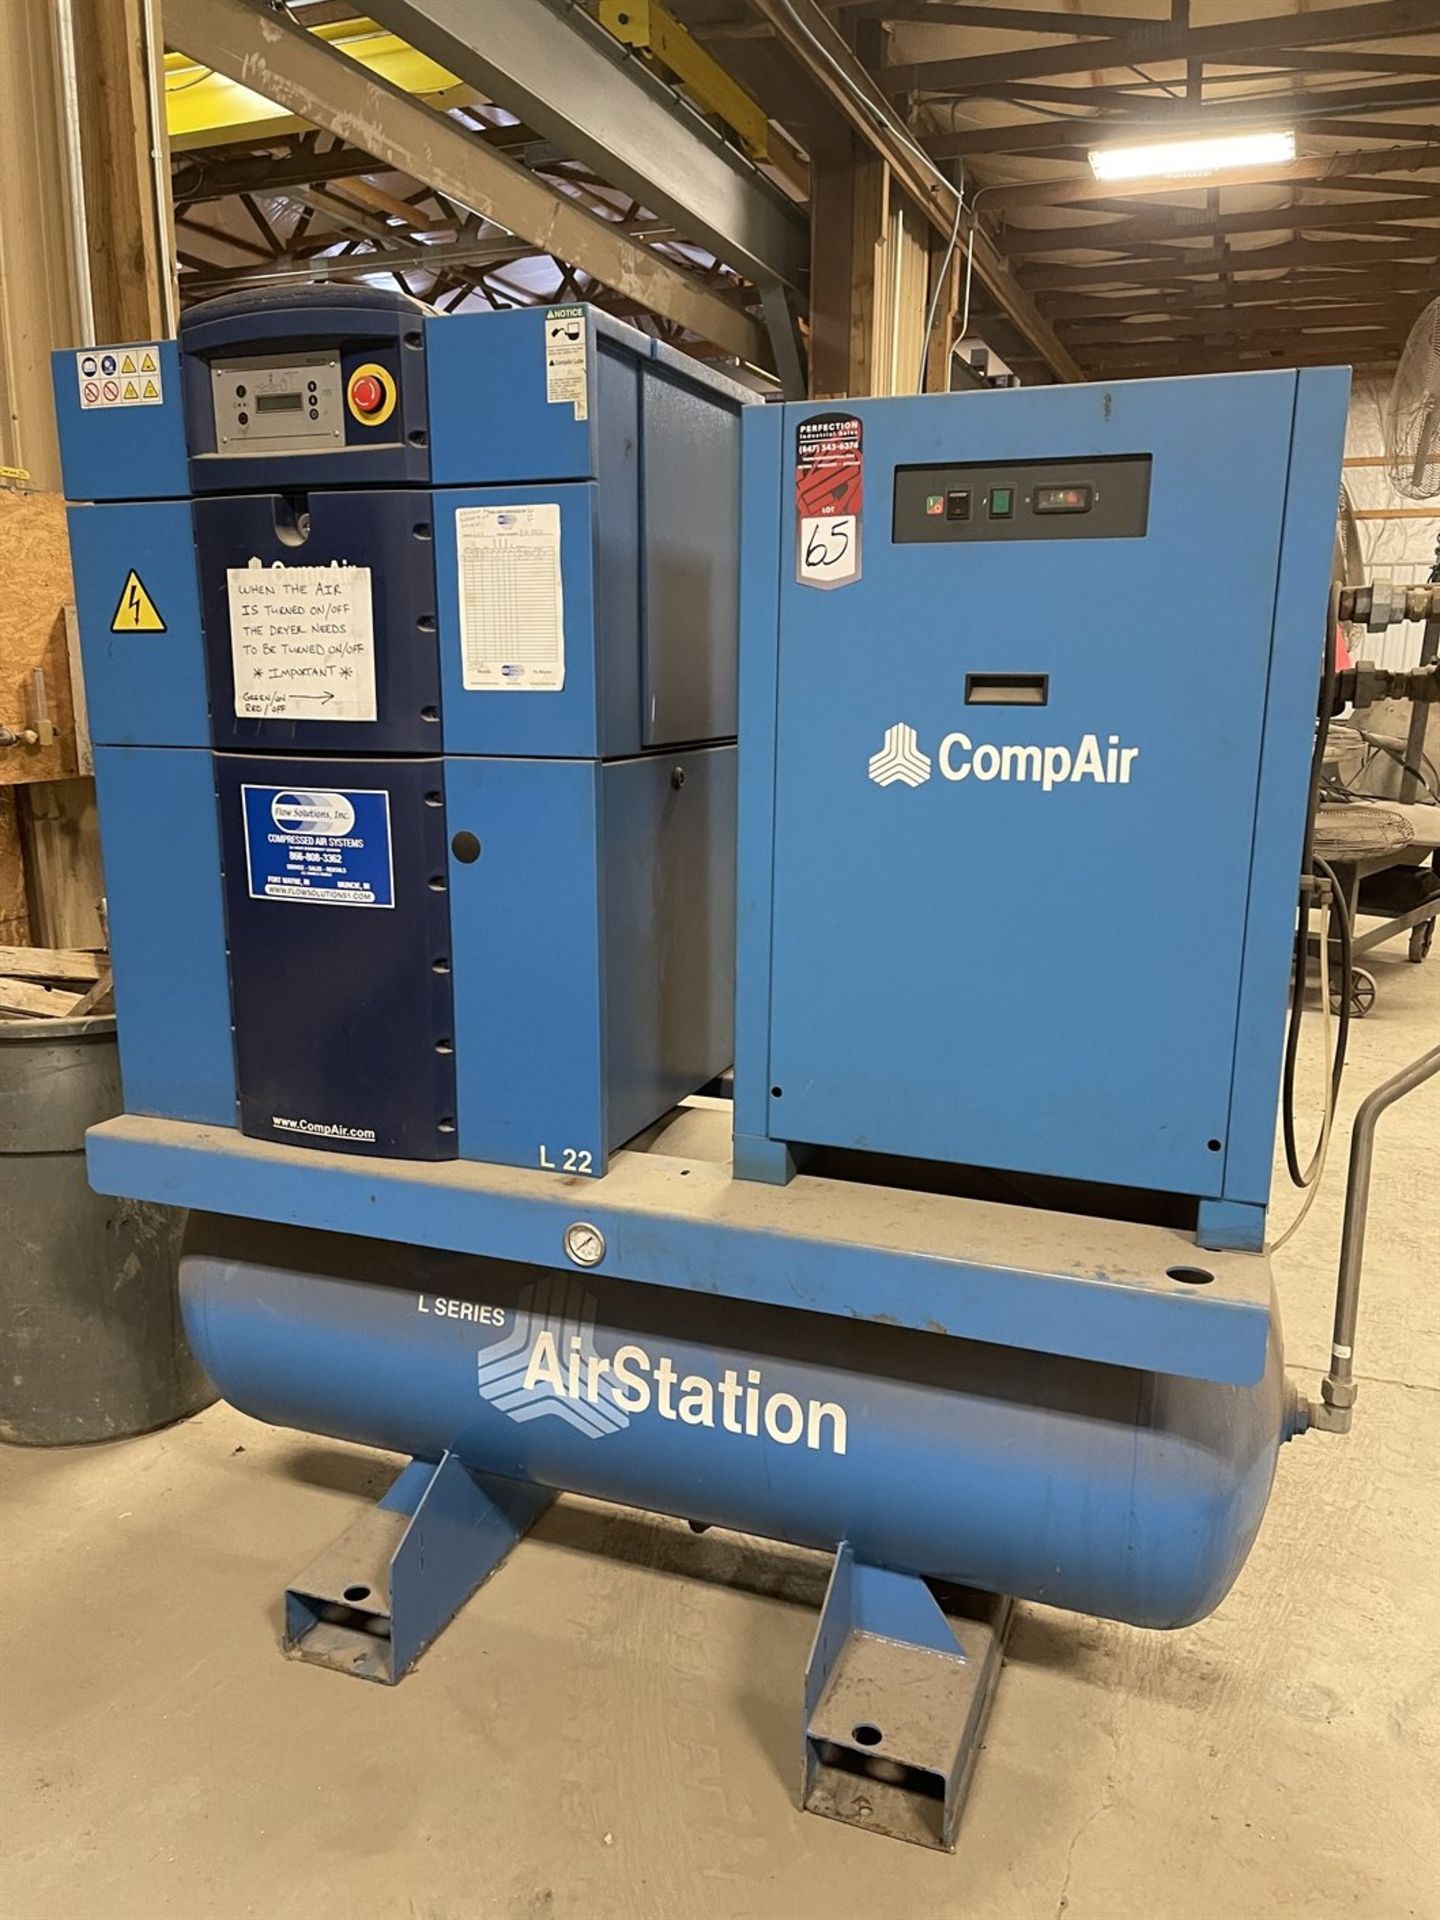 2012 CompAir L22 L-Series Air Station Compressor System, s/n D102821, 30 HP, 125 PSI, w/ compare